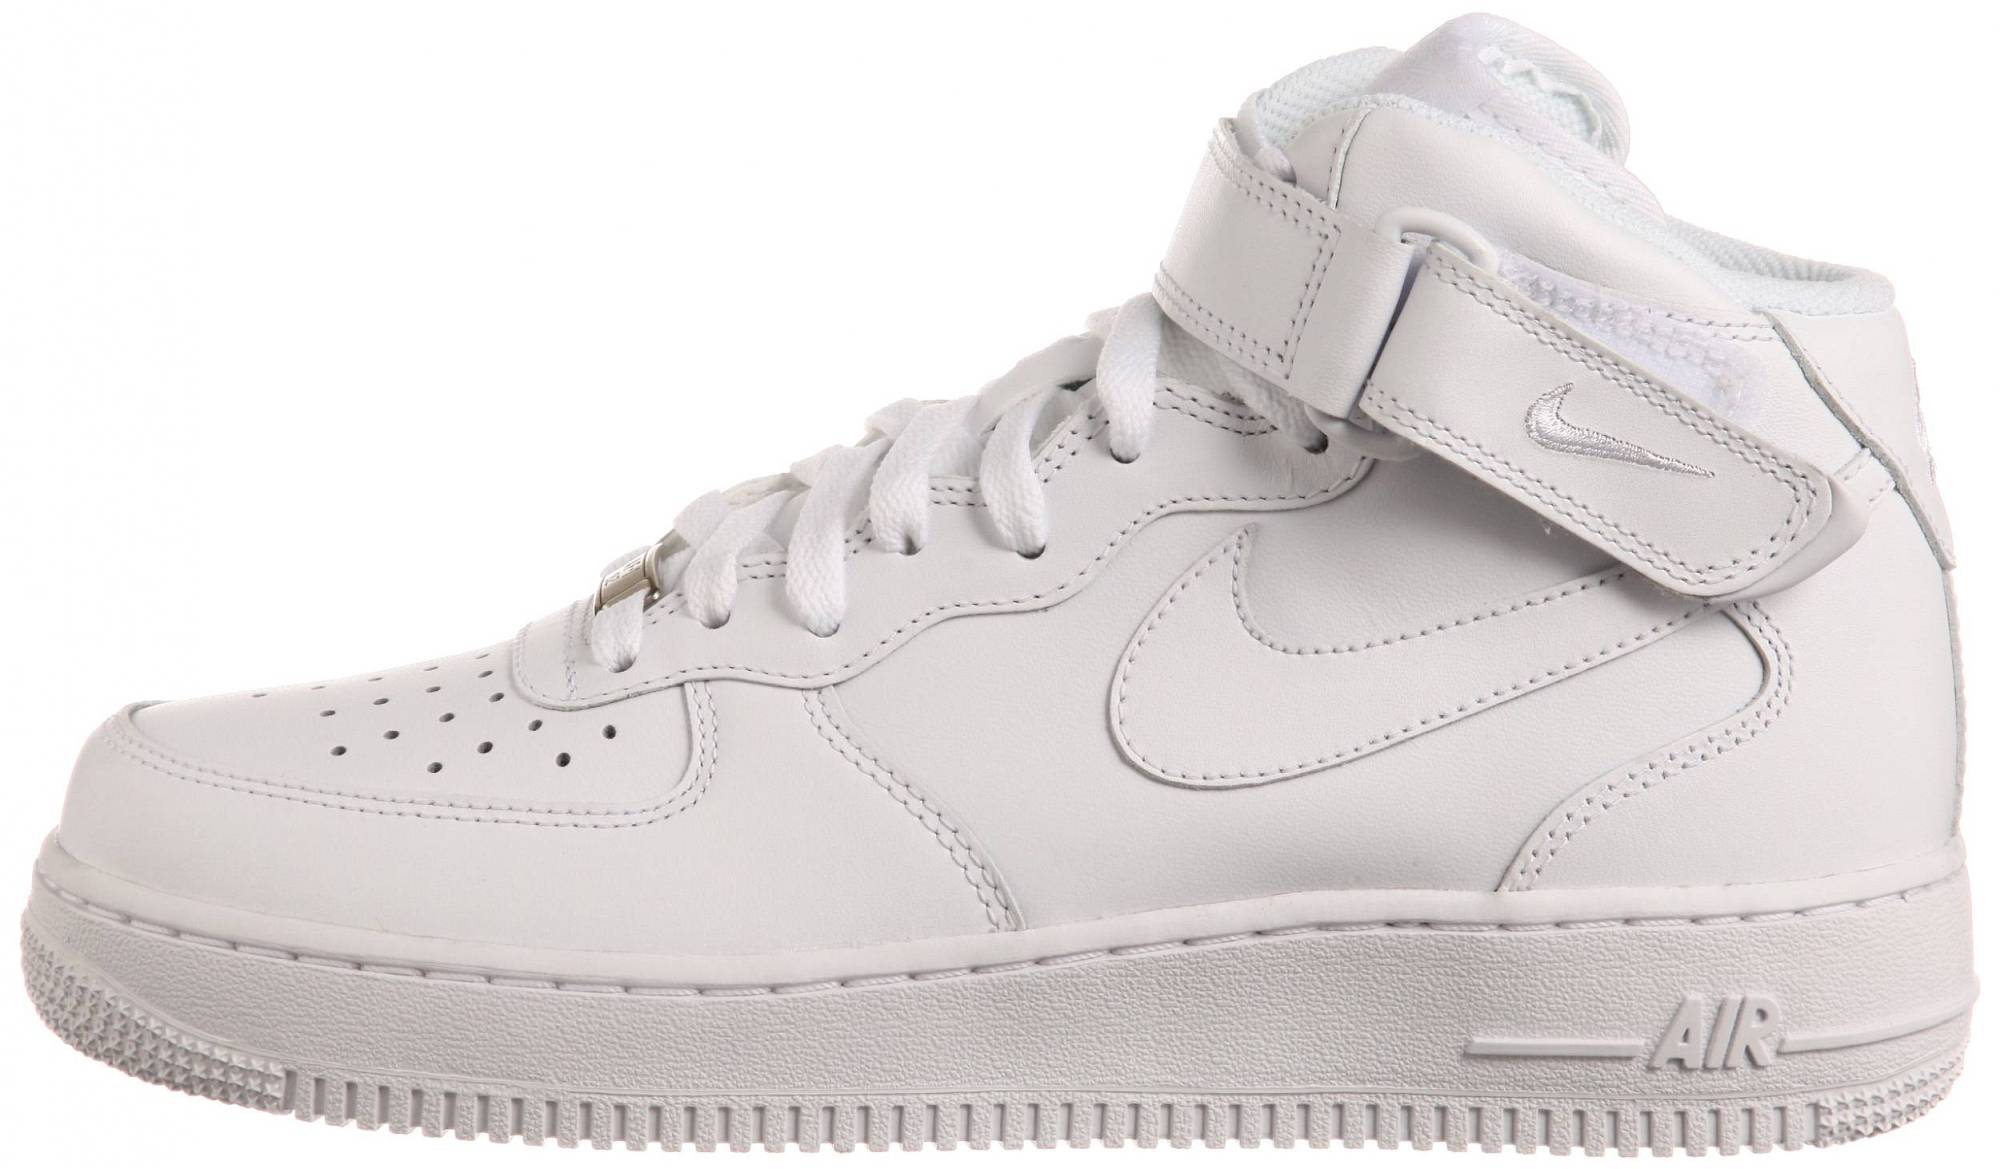 Nike Air Force 1 Mid – Shoes Reviews & Reasons To Buy